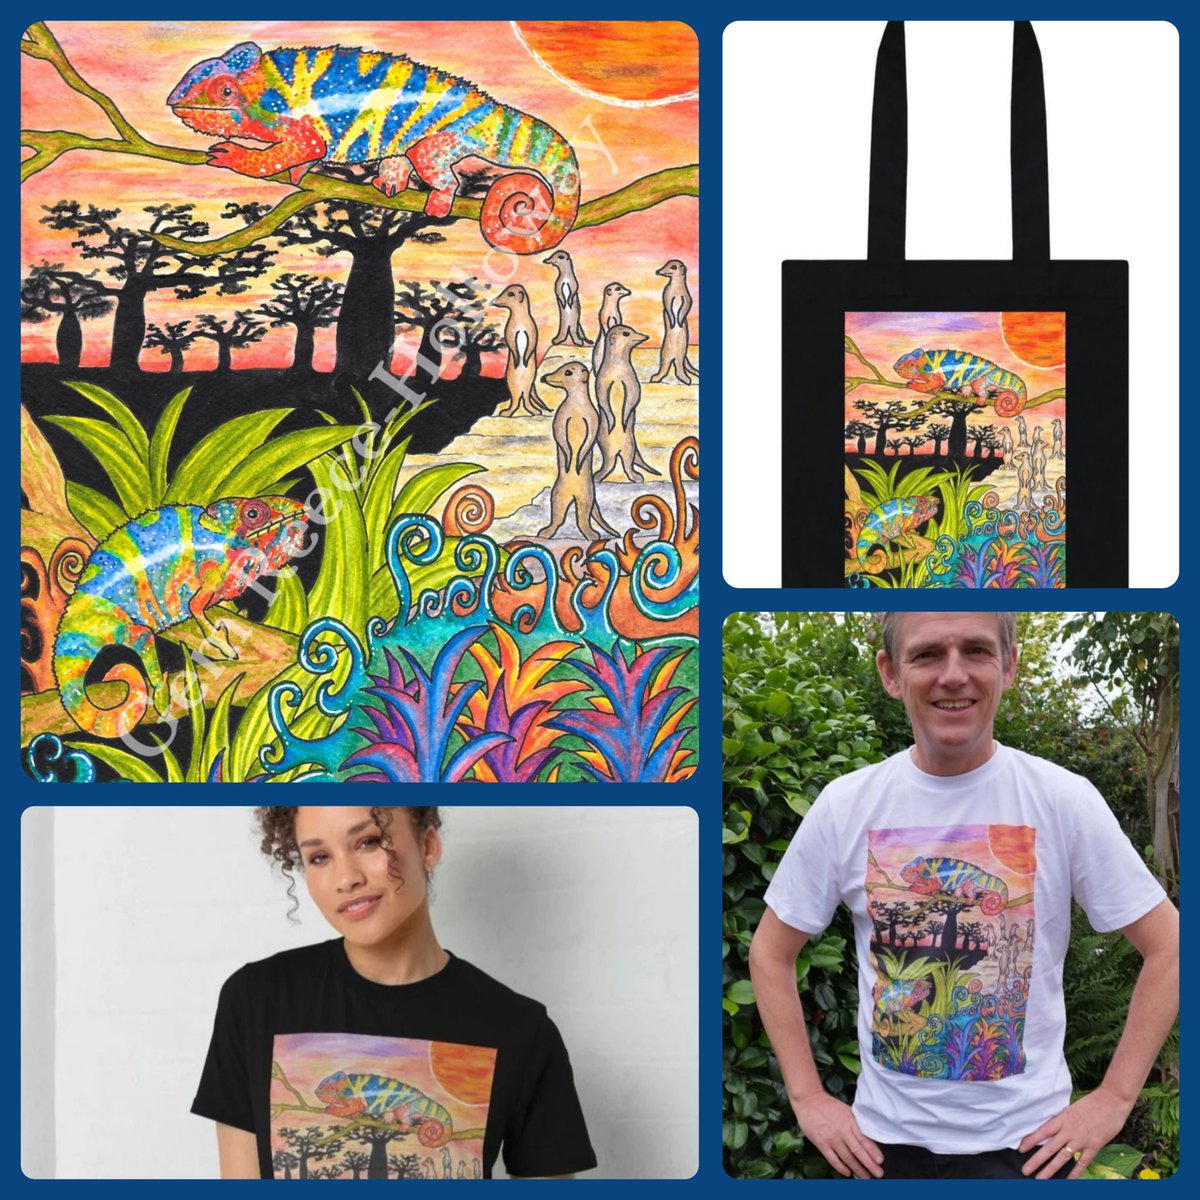 Today's #mhhsbd word challenge is LIZARD 🦎 so here are some gorgeous Panther Chameleons - available on cards, fine art prints, bags, t-shirts (see my husband modelling below 😍) and more.  thehollowwayshop.etsy.com 🦎 the-hollow-way.teemill.com
#shopindie #earlybiz #elevenseshour